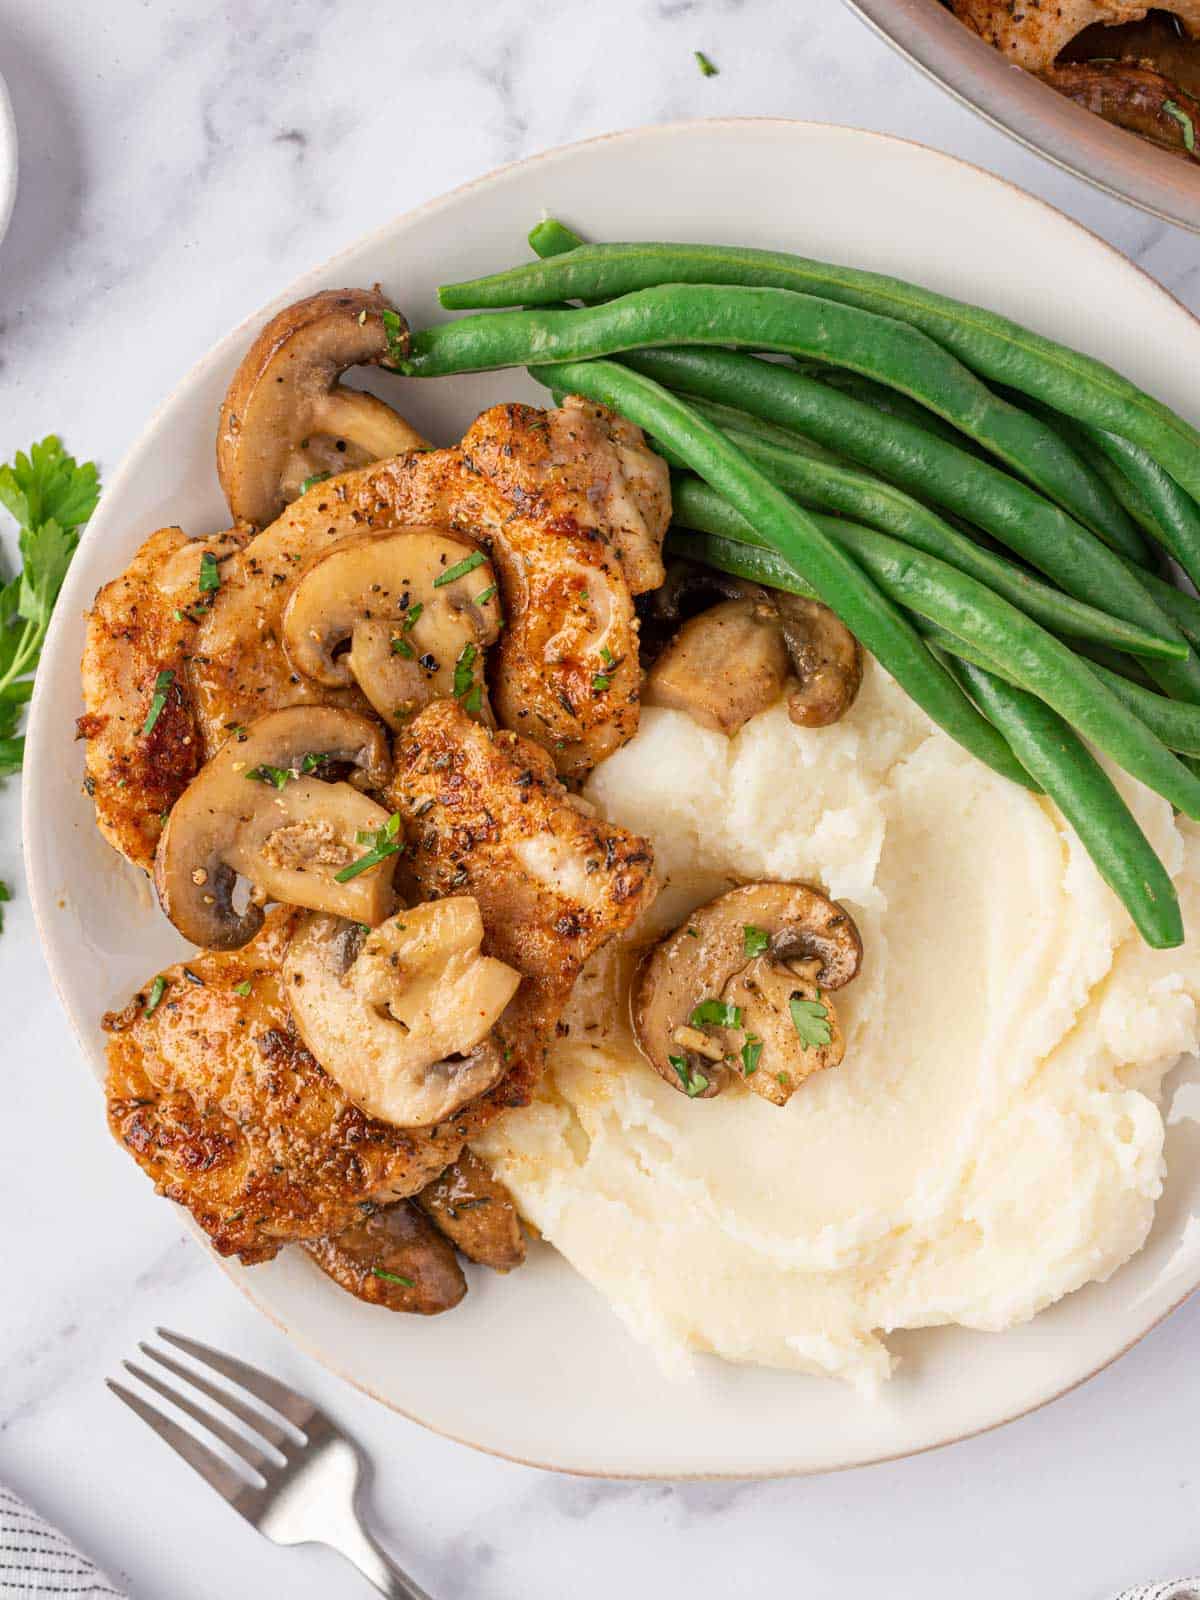 A plate of mushroom garlic chicken thighs with mashed potatoes and green beans.